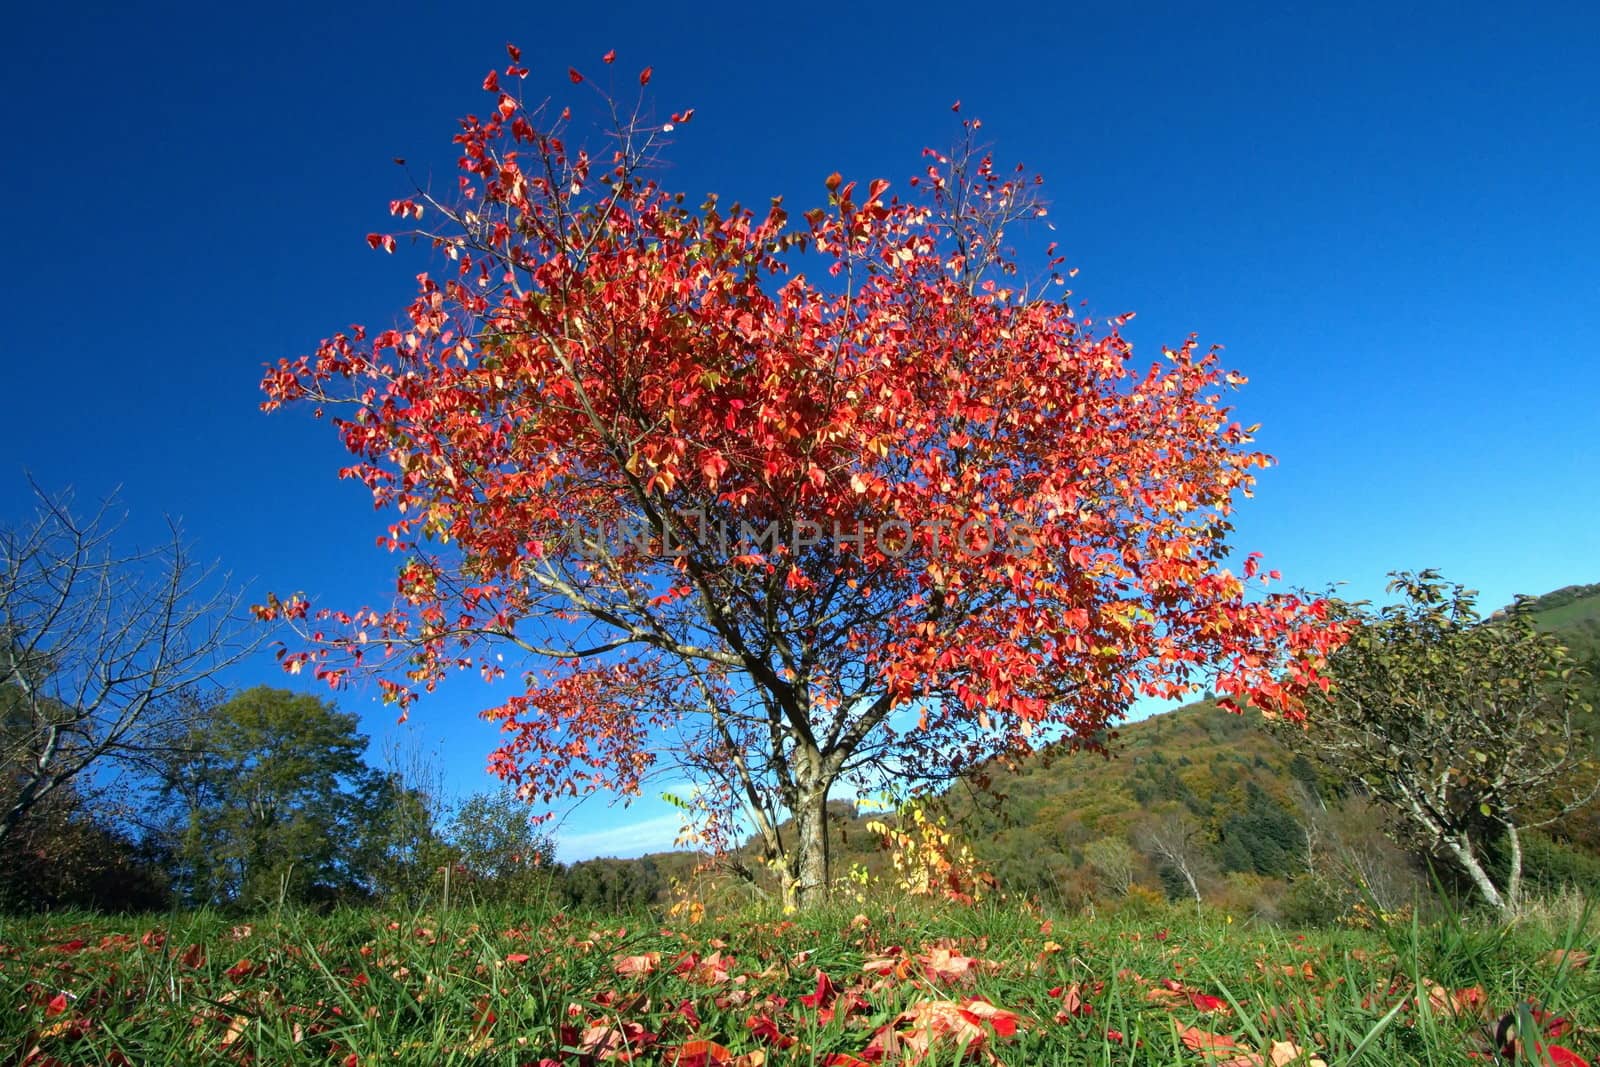 Alone red autumn tree on hill and deep blue sky